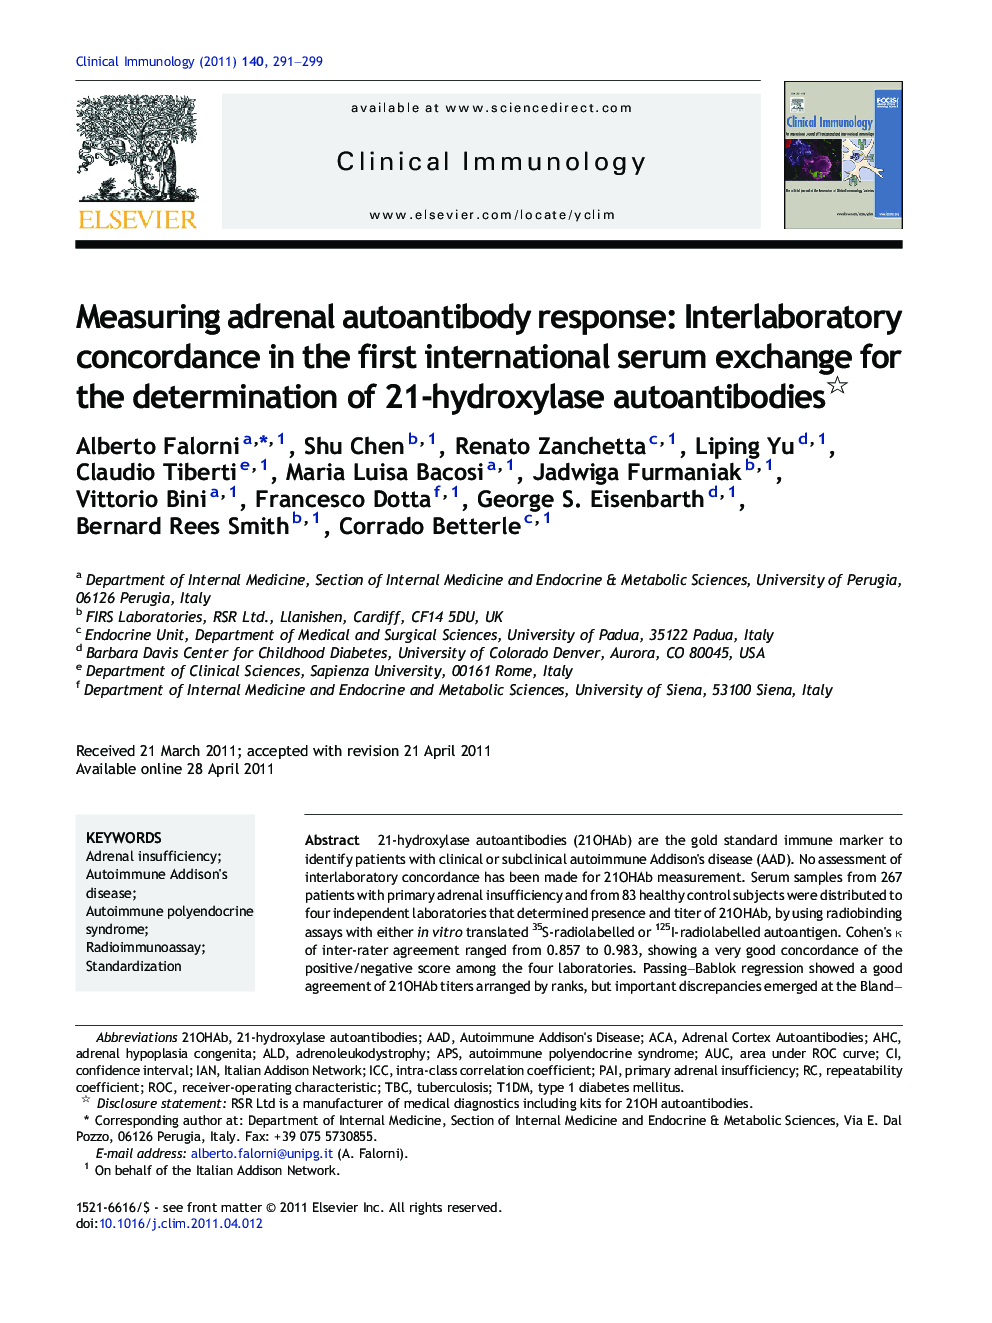 Measuring adrenal autoantibody response: Interlaboratory concordance in the first international serum exchange for the determination of 21-hydroxylase autoantibodies